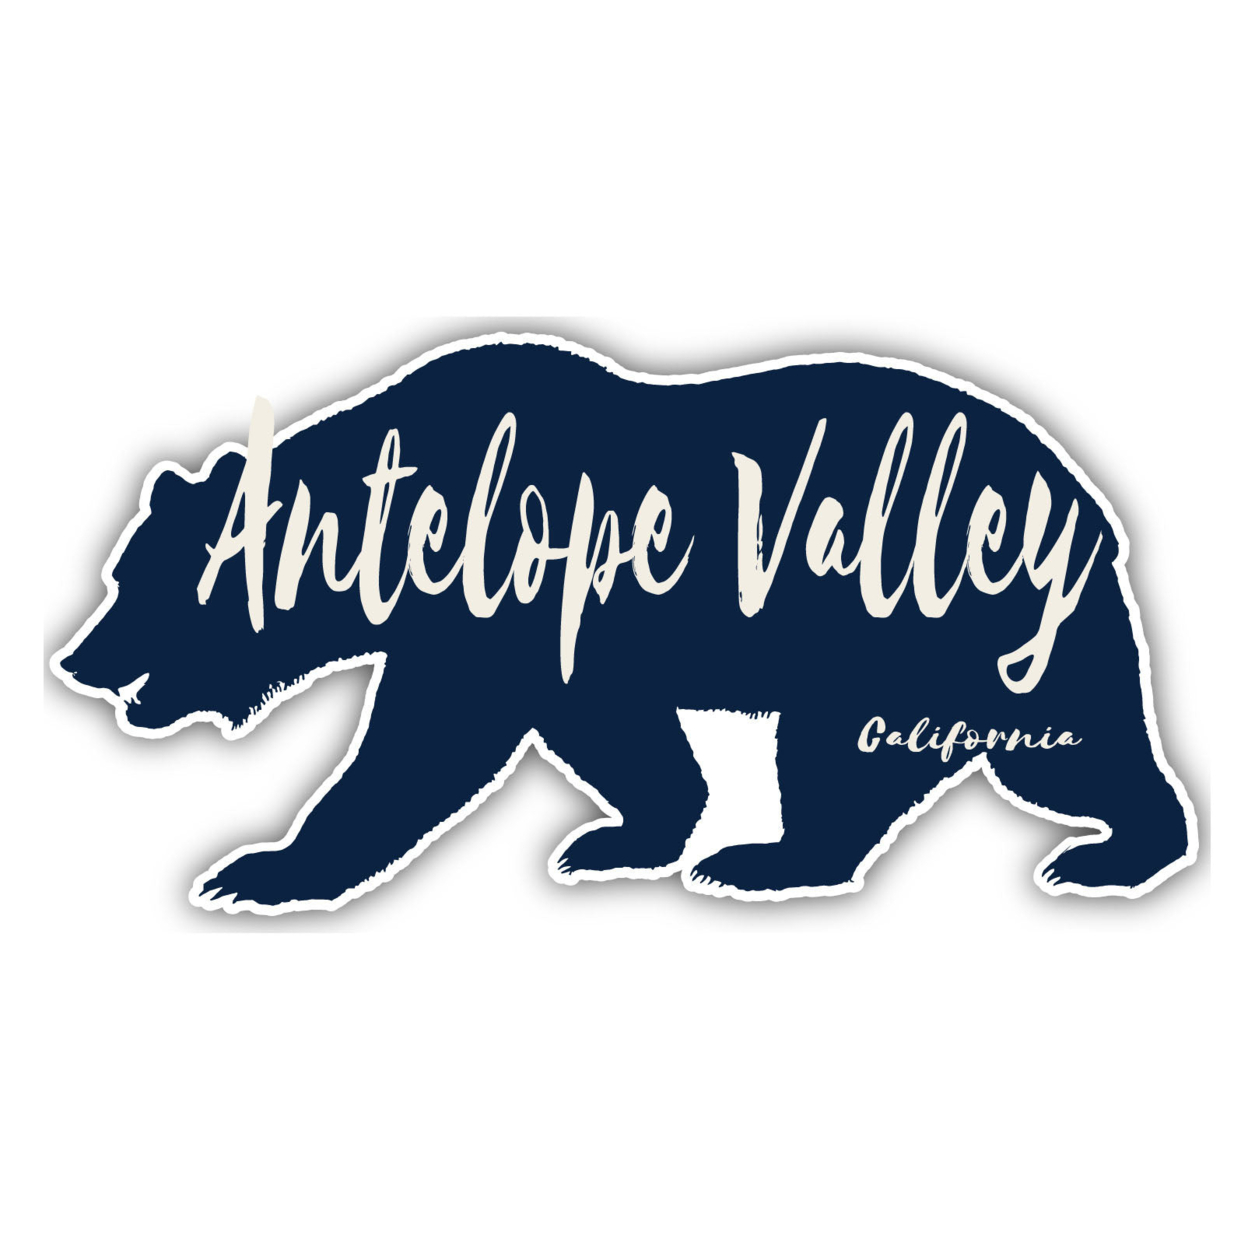 Antelope Valley California Souvenir Decorative Stickers (Choose Theme And Size) - Single Unit, 4-Inch, Tent